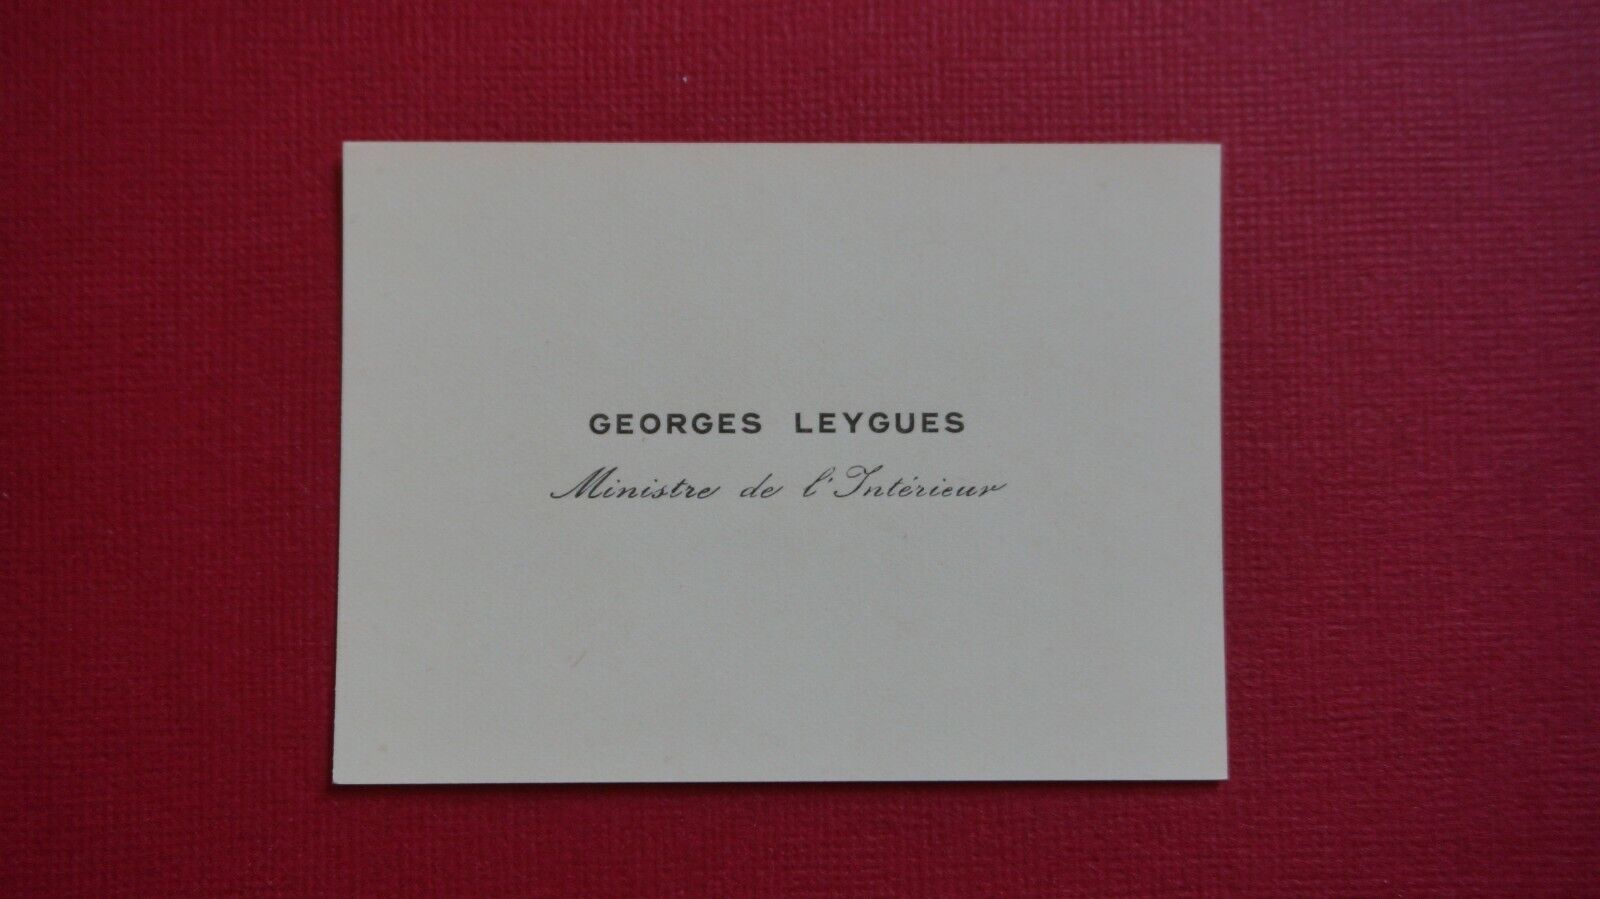 BUSINESS CARD-GEORGES LEYGUES - MINISTER OF THE INTERIOR - PRIME MINISTER